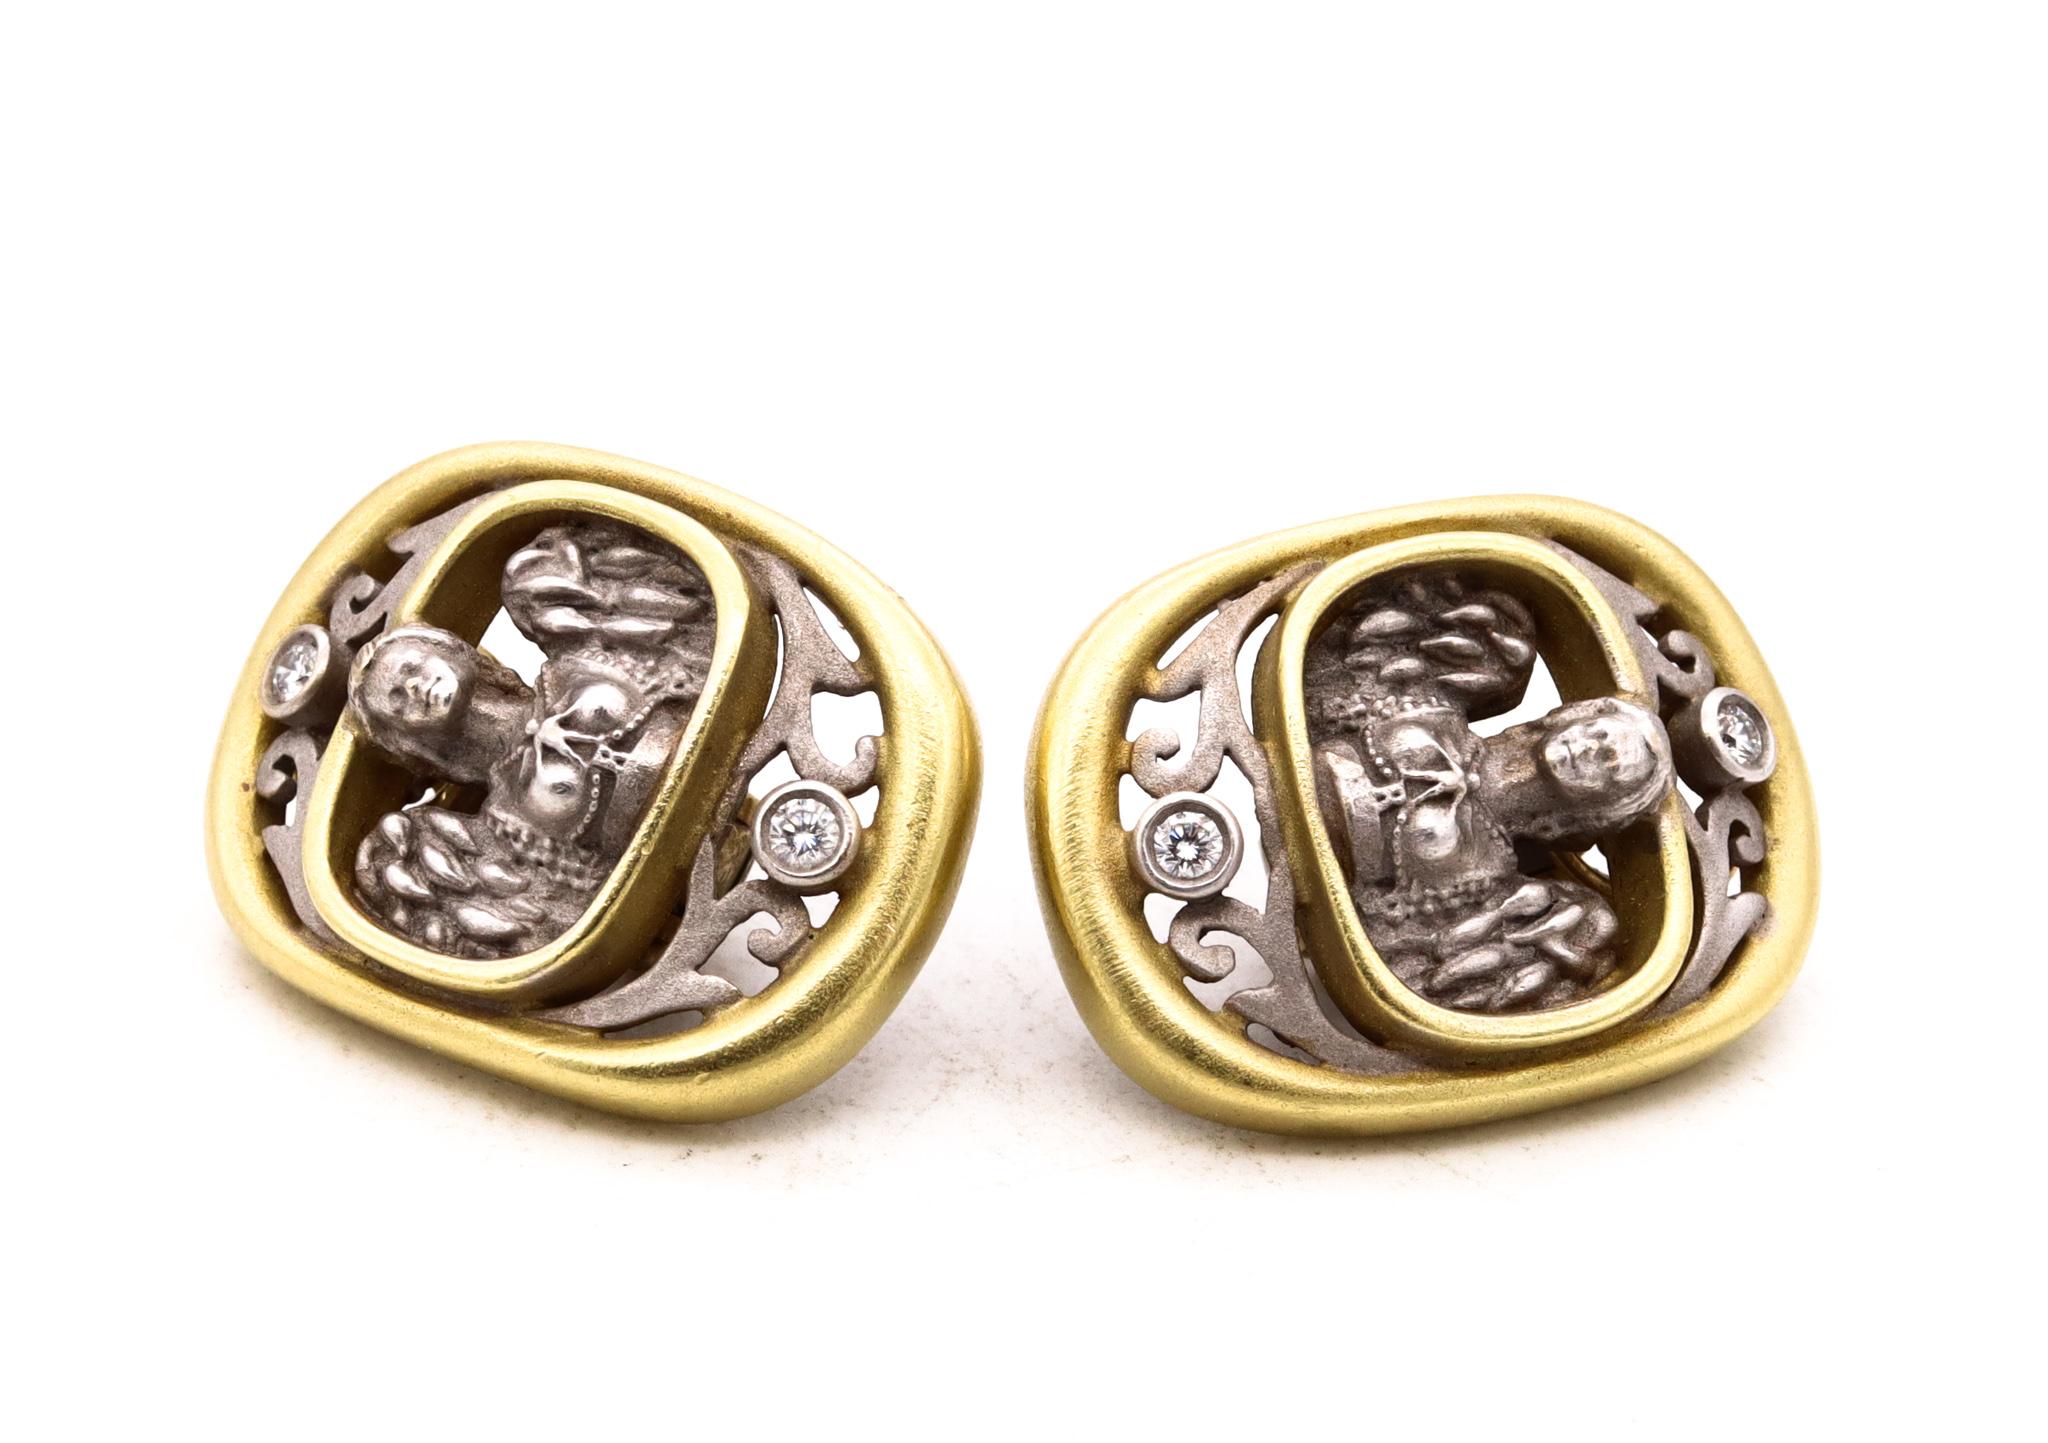 Kieselstein Cord 2001 Classic Etruscan Clips Earrings 18Kt Gold With VS Diamonds In Excellent Condition For Sale In Miami, FL